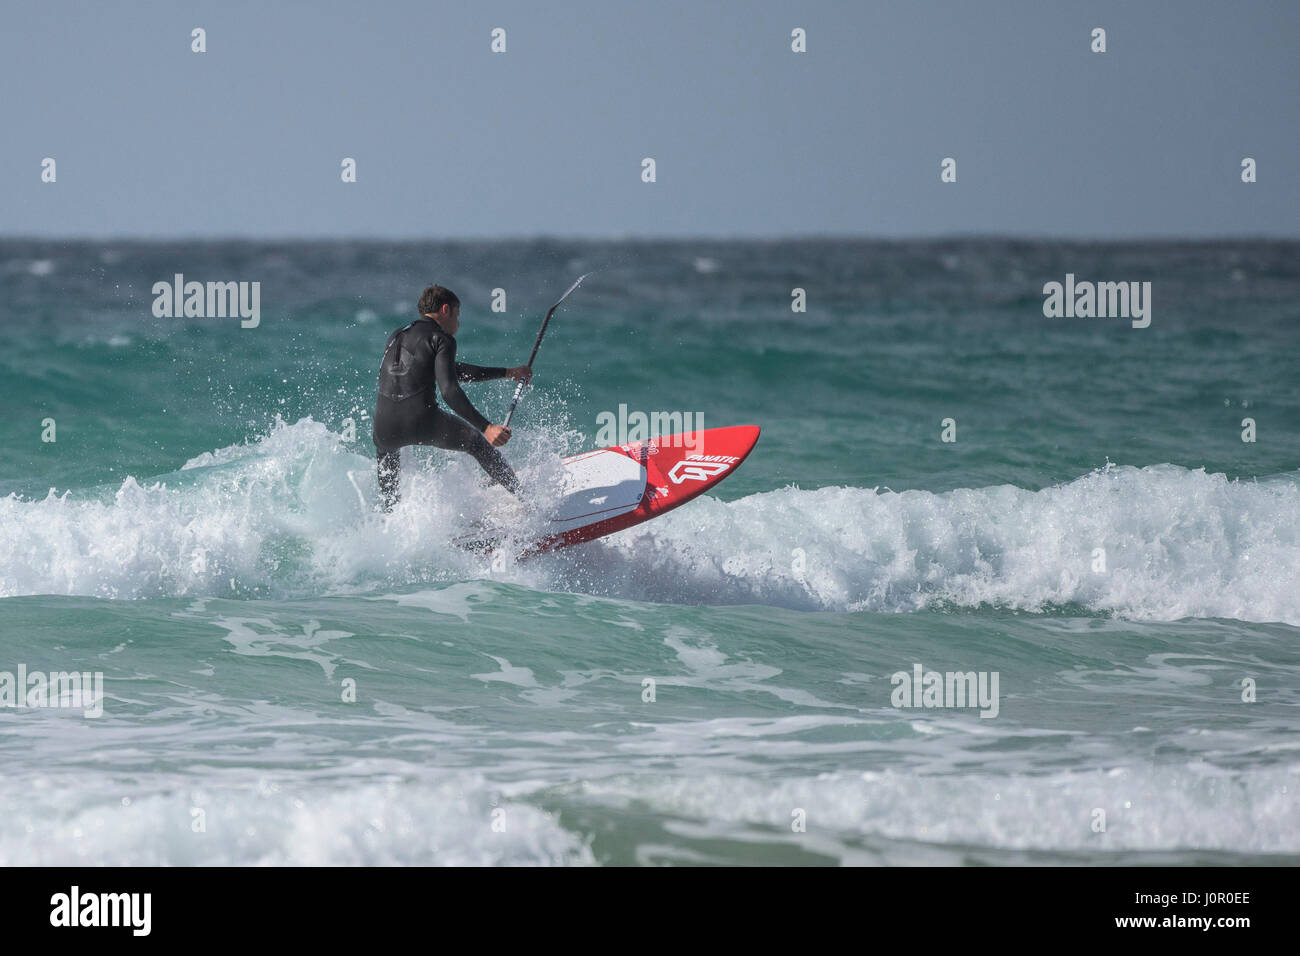 UK Paddle boarding Paddle boarder Surf Wave Sea Spray Watersport Physical activity Skill Spectacular action Leisure activity Lifestyle Stock Photo